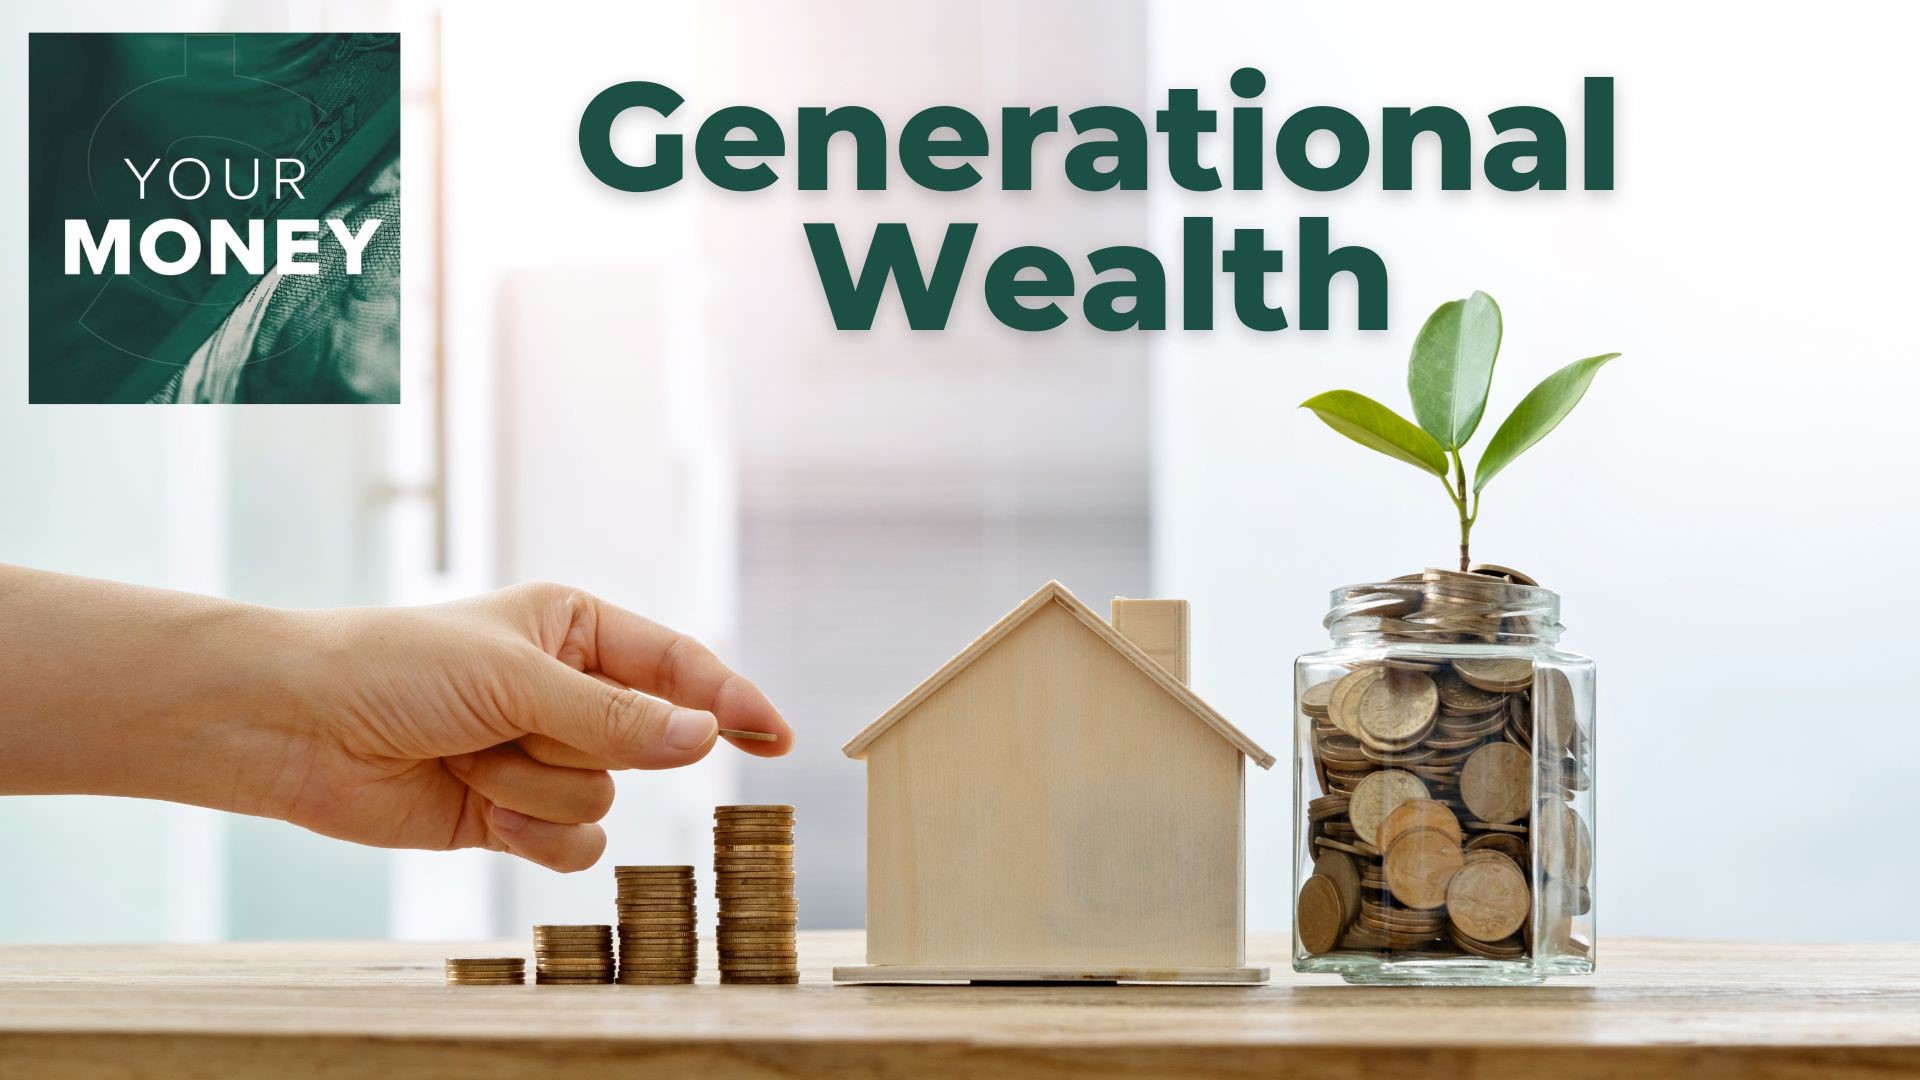 Gordon Severson sits down with an expert to discuss generational wealth. Tips on passing money down to kids and grandkids, plus how to invest and promote equity.